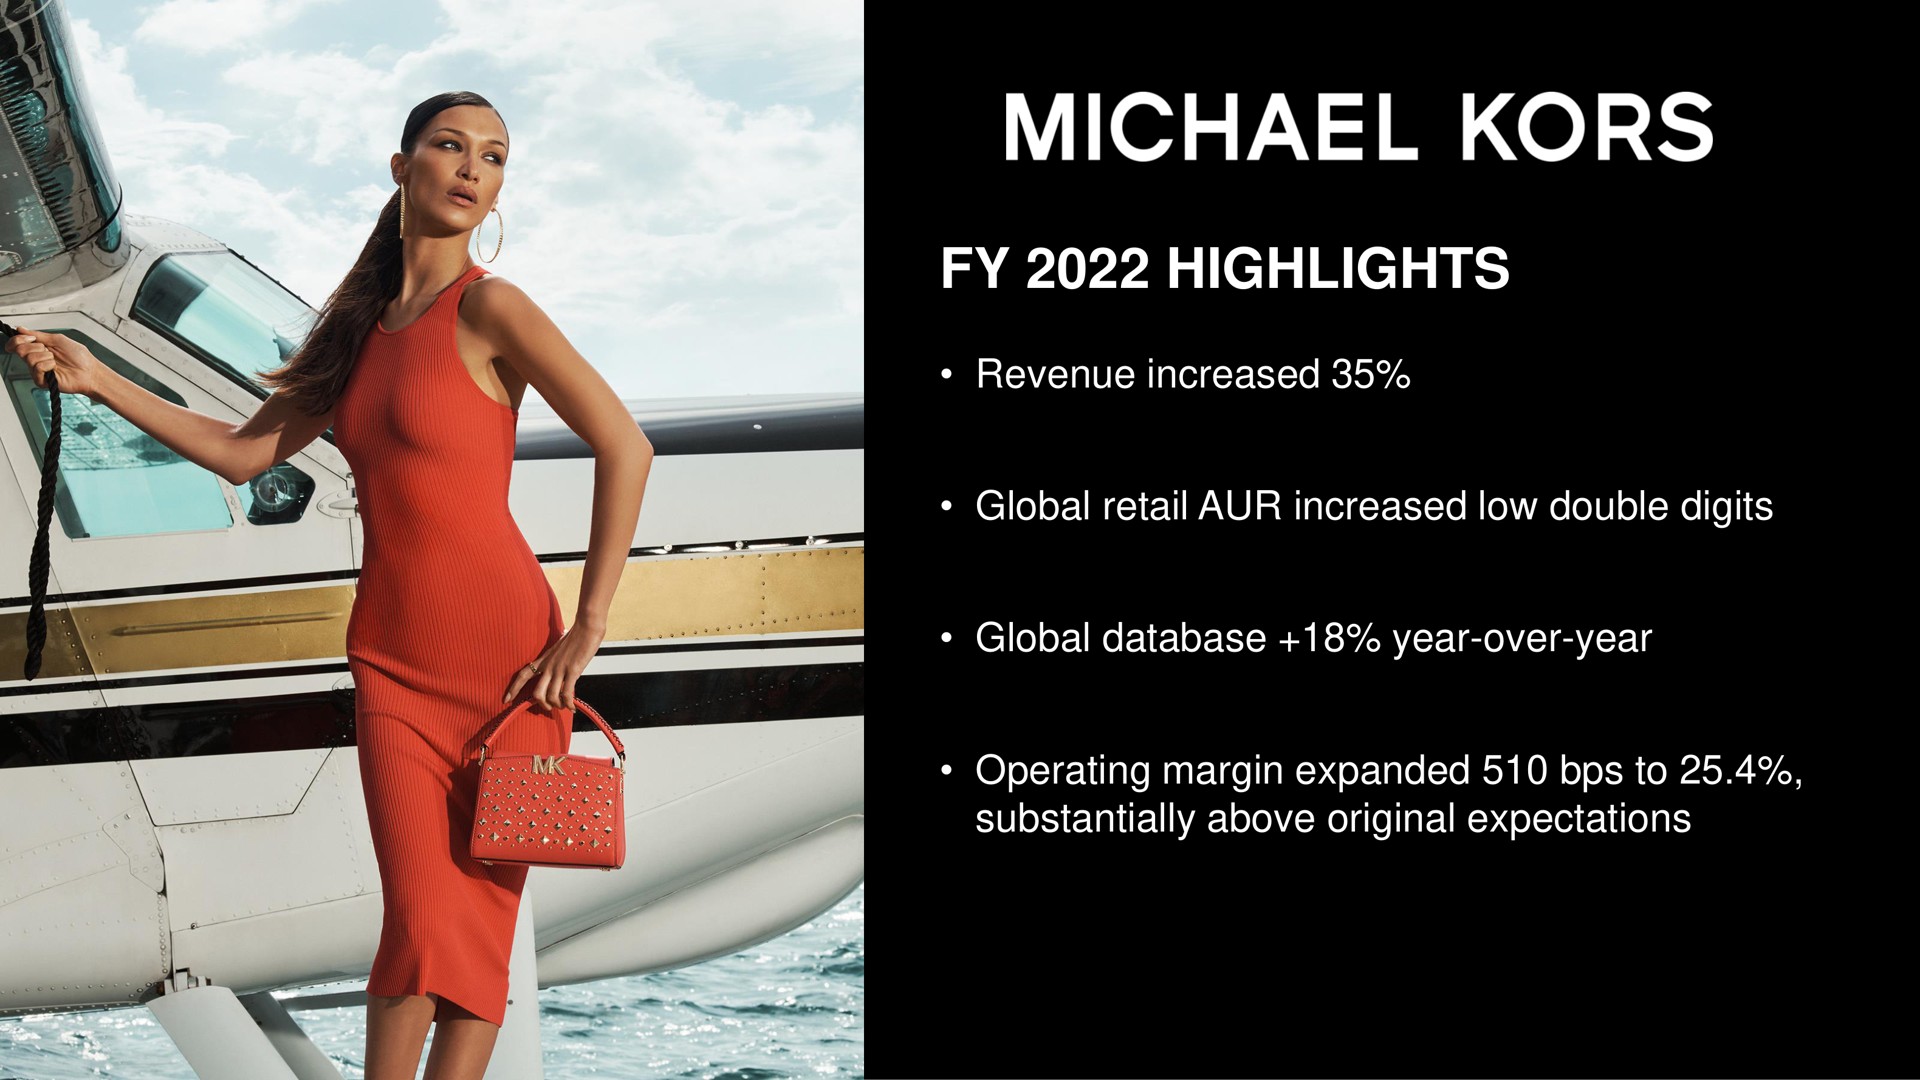 highlights revenue increased global retail increased low double digits global year over year operating margin expanded to substantially above original expectations kors | Capri Holdings